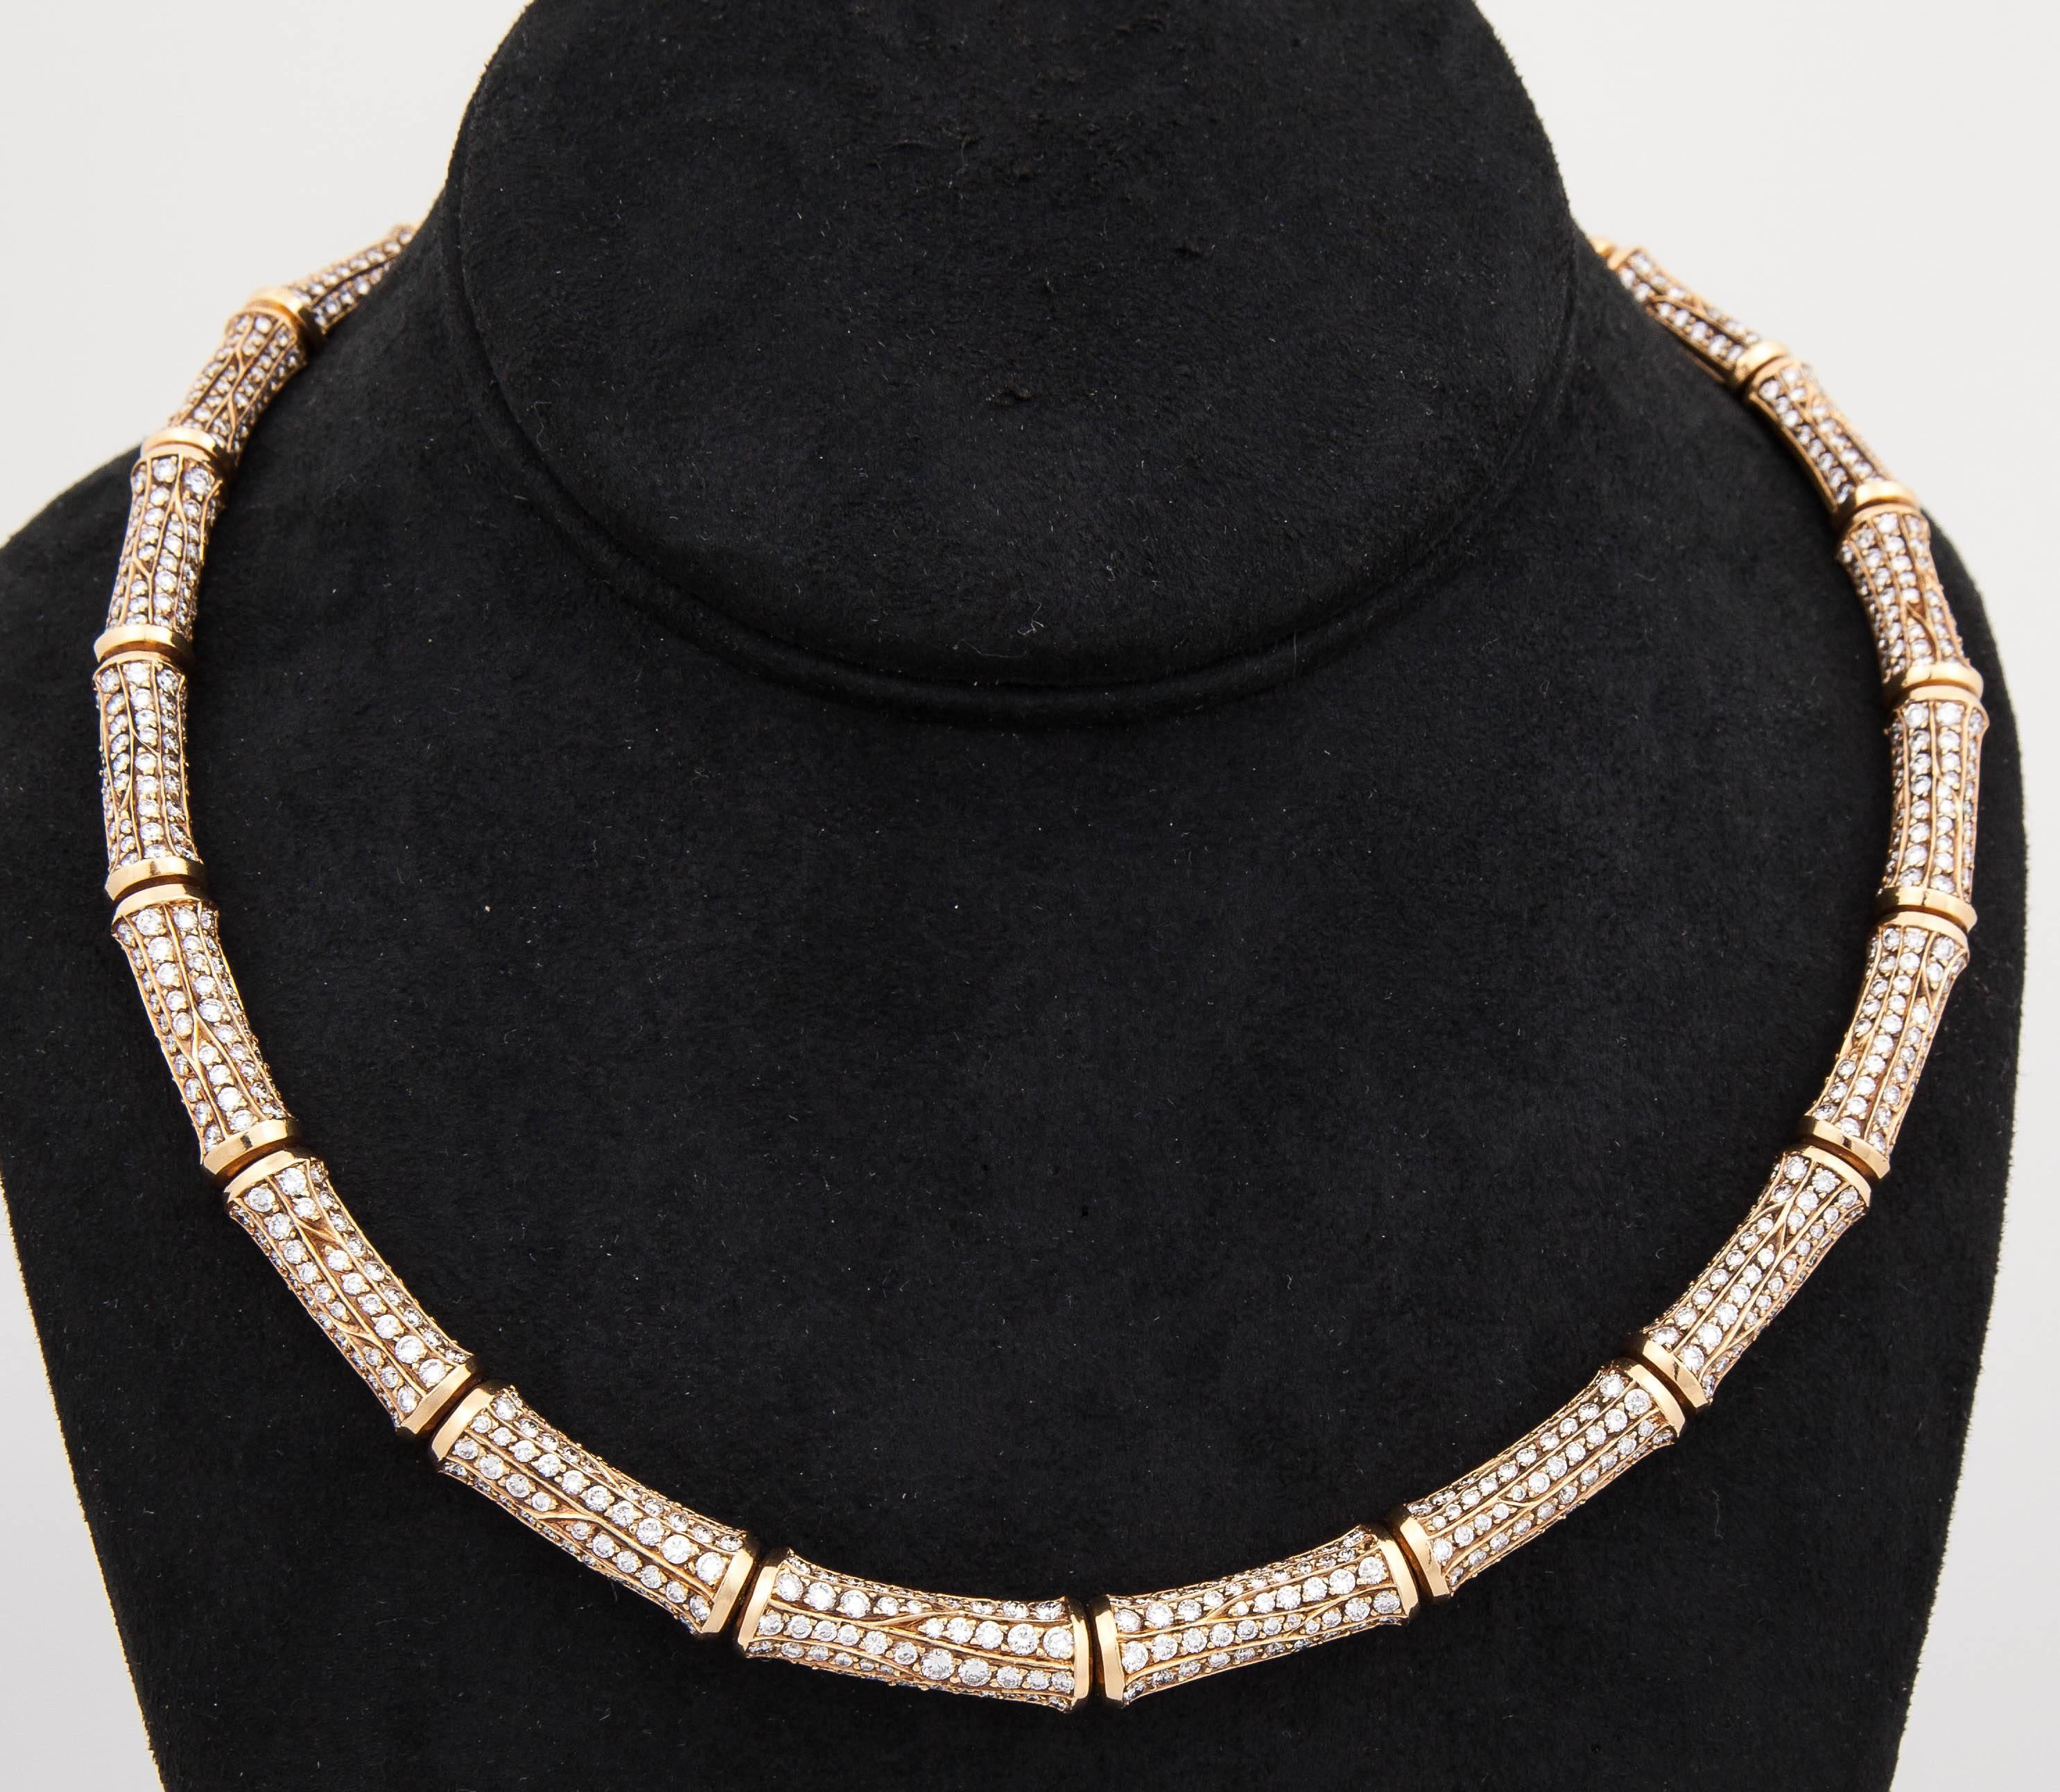 Splendid Cartier Necklace, designed as a series of bamboo motif set with brilliant-cut diamonds weighing approximately 22.00 carats, mounted in 18k yellow gold.